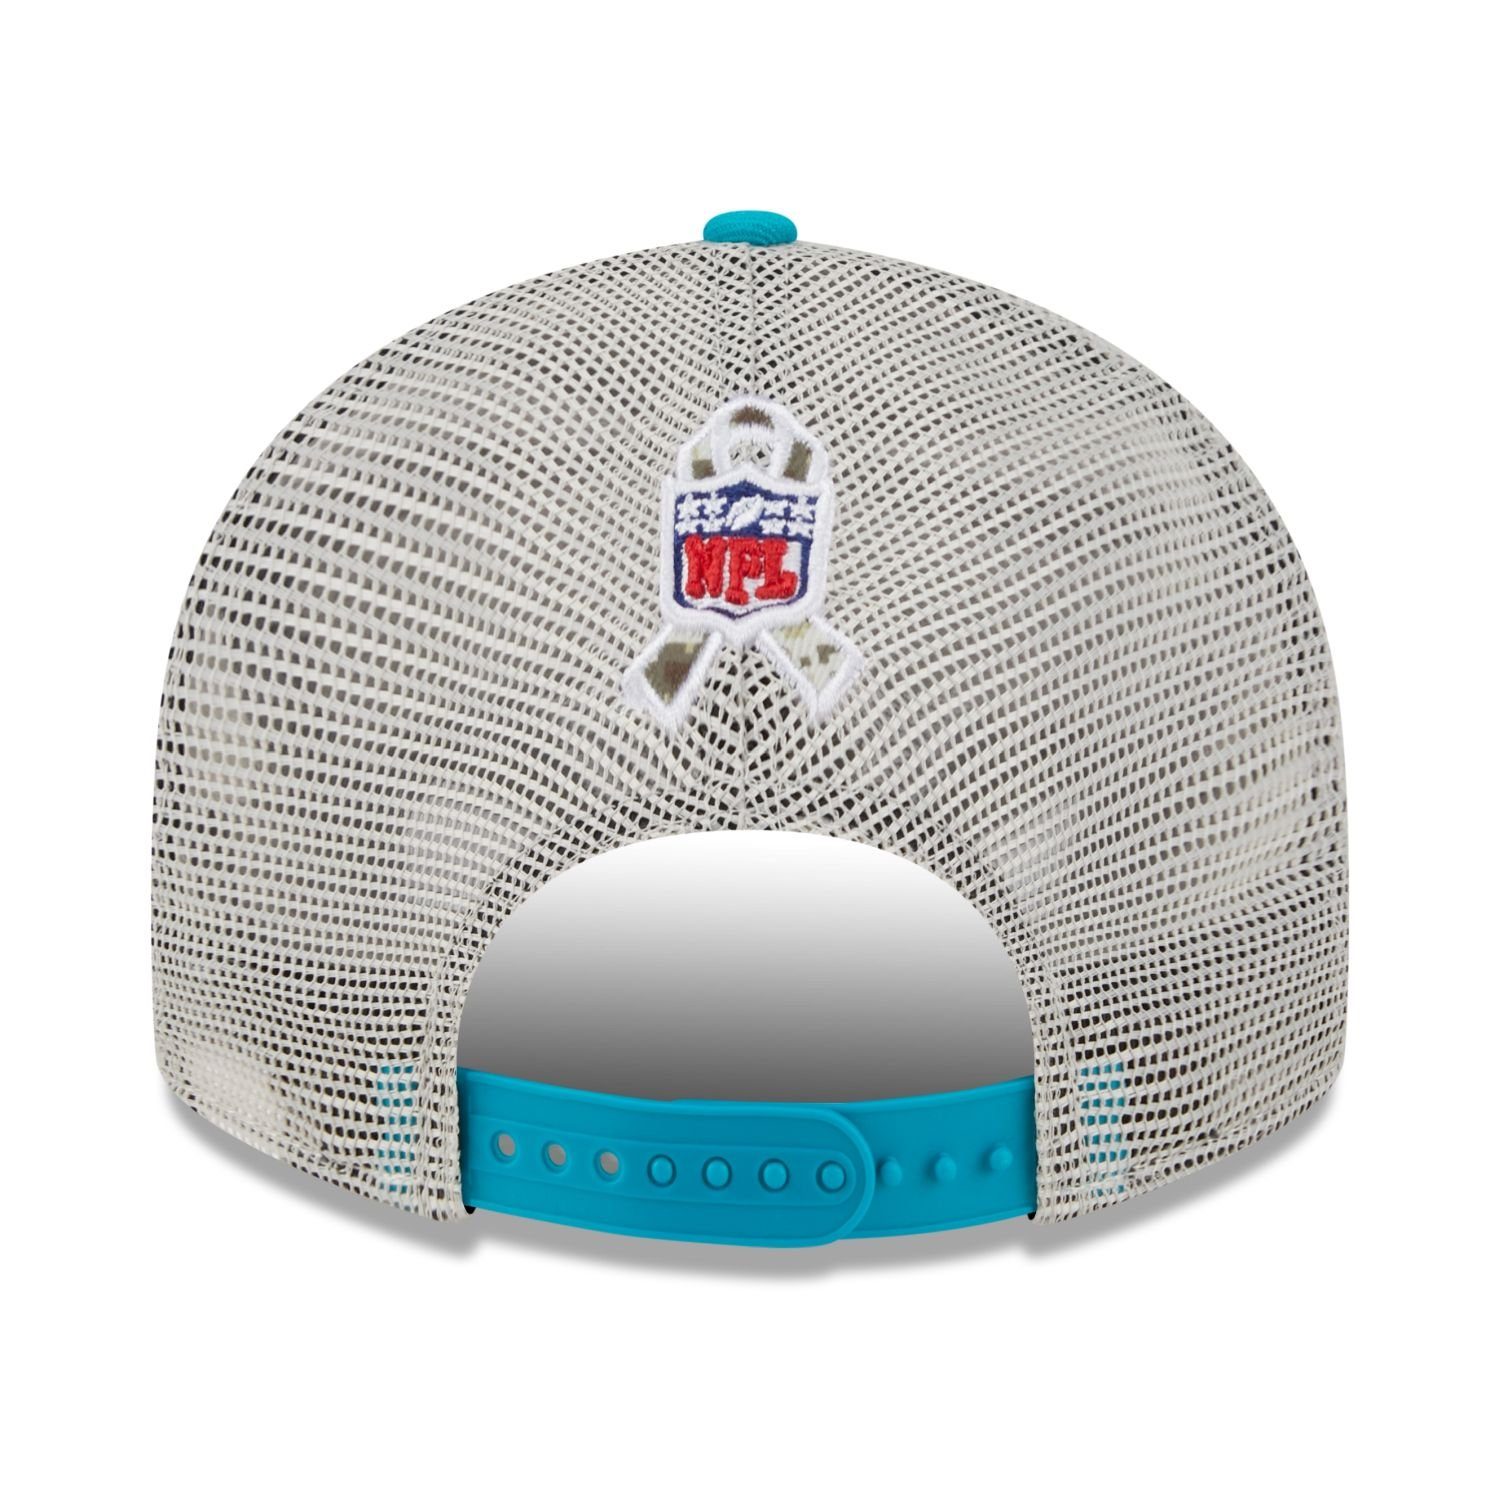 Snap Low Miami Service 9Fifty New Salute Cap Era Snapback NFL Dolphins Profile to